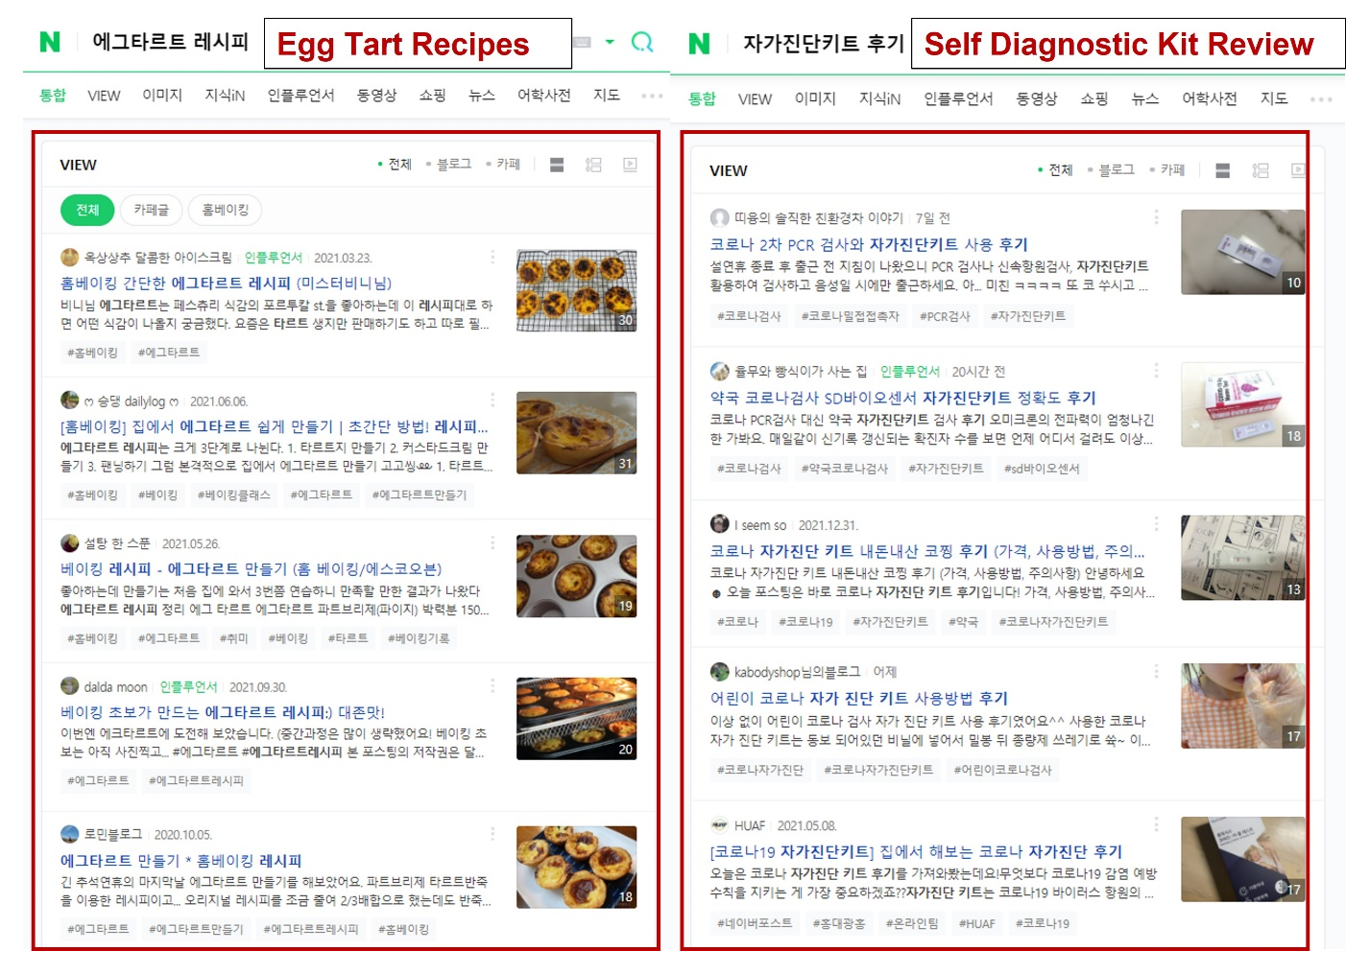 4. Naver VIEW sections for search terms “egg tart recipes” (left) and “self-diagnostic kit review” (right)